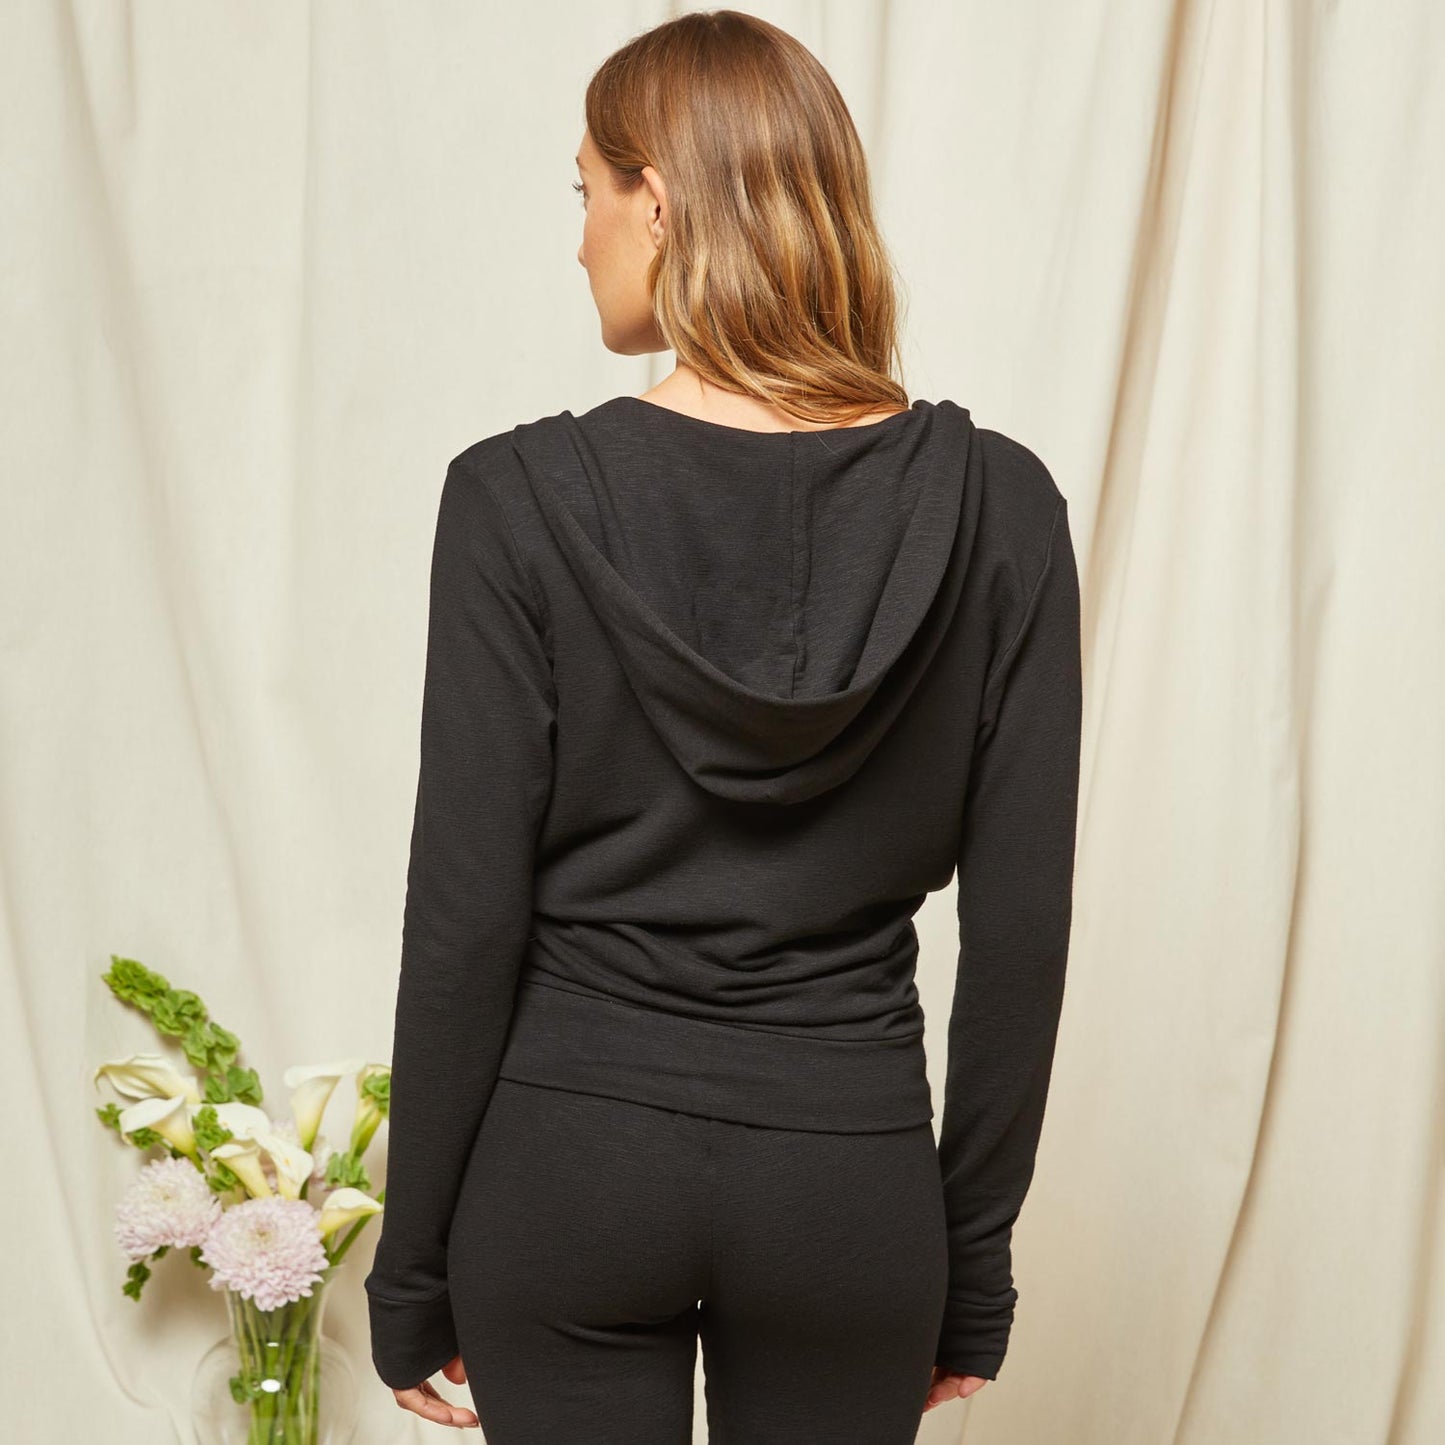 Back view of model wearing the Bridal Supersoft Zip Up Hoody in Black.